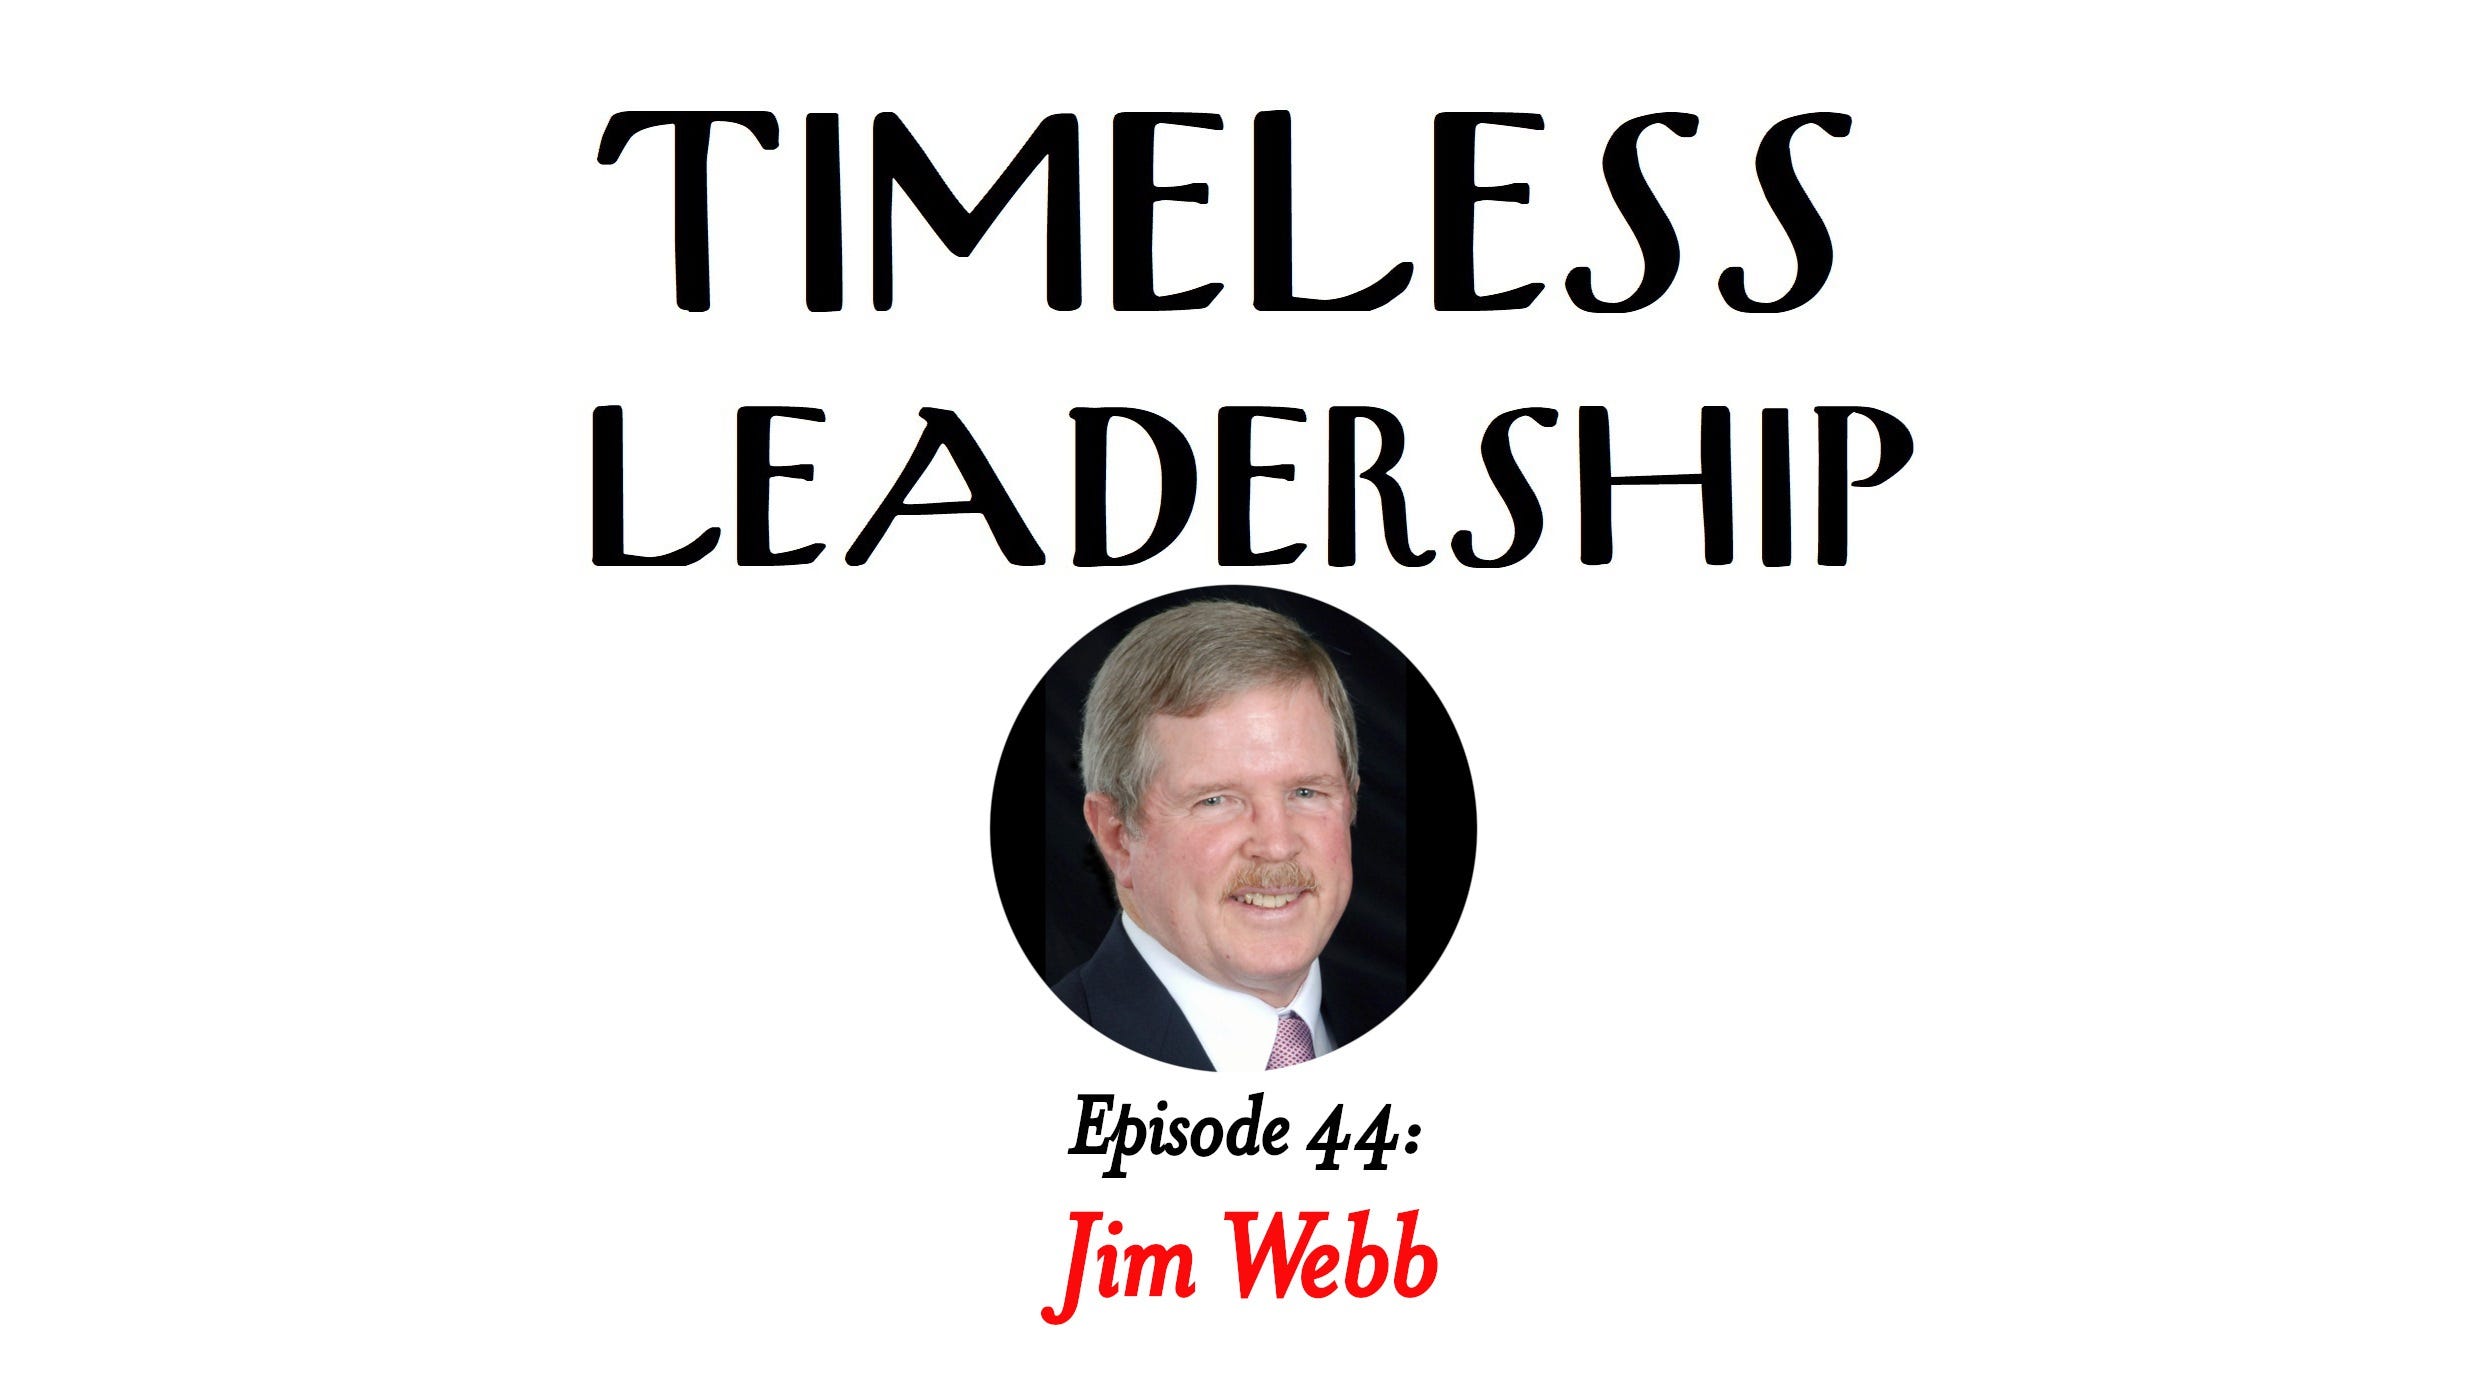 Episode 44: Innovators Who Changed the World with Jim Webb